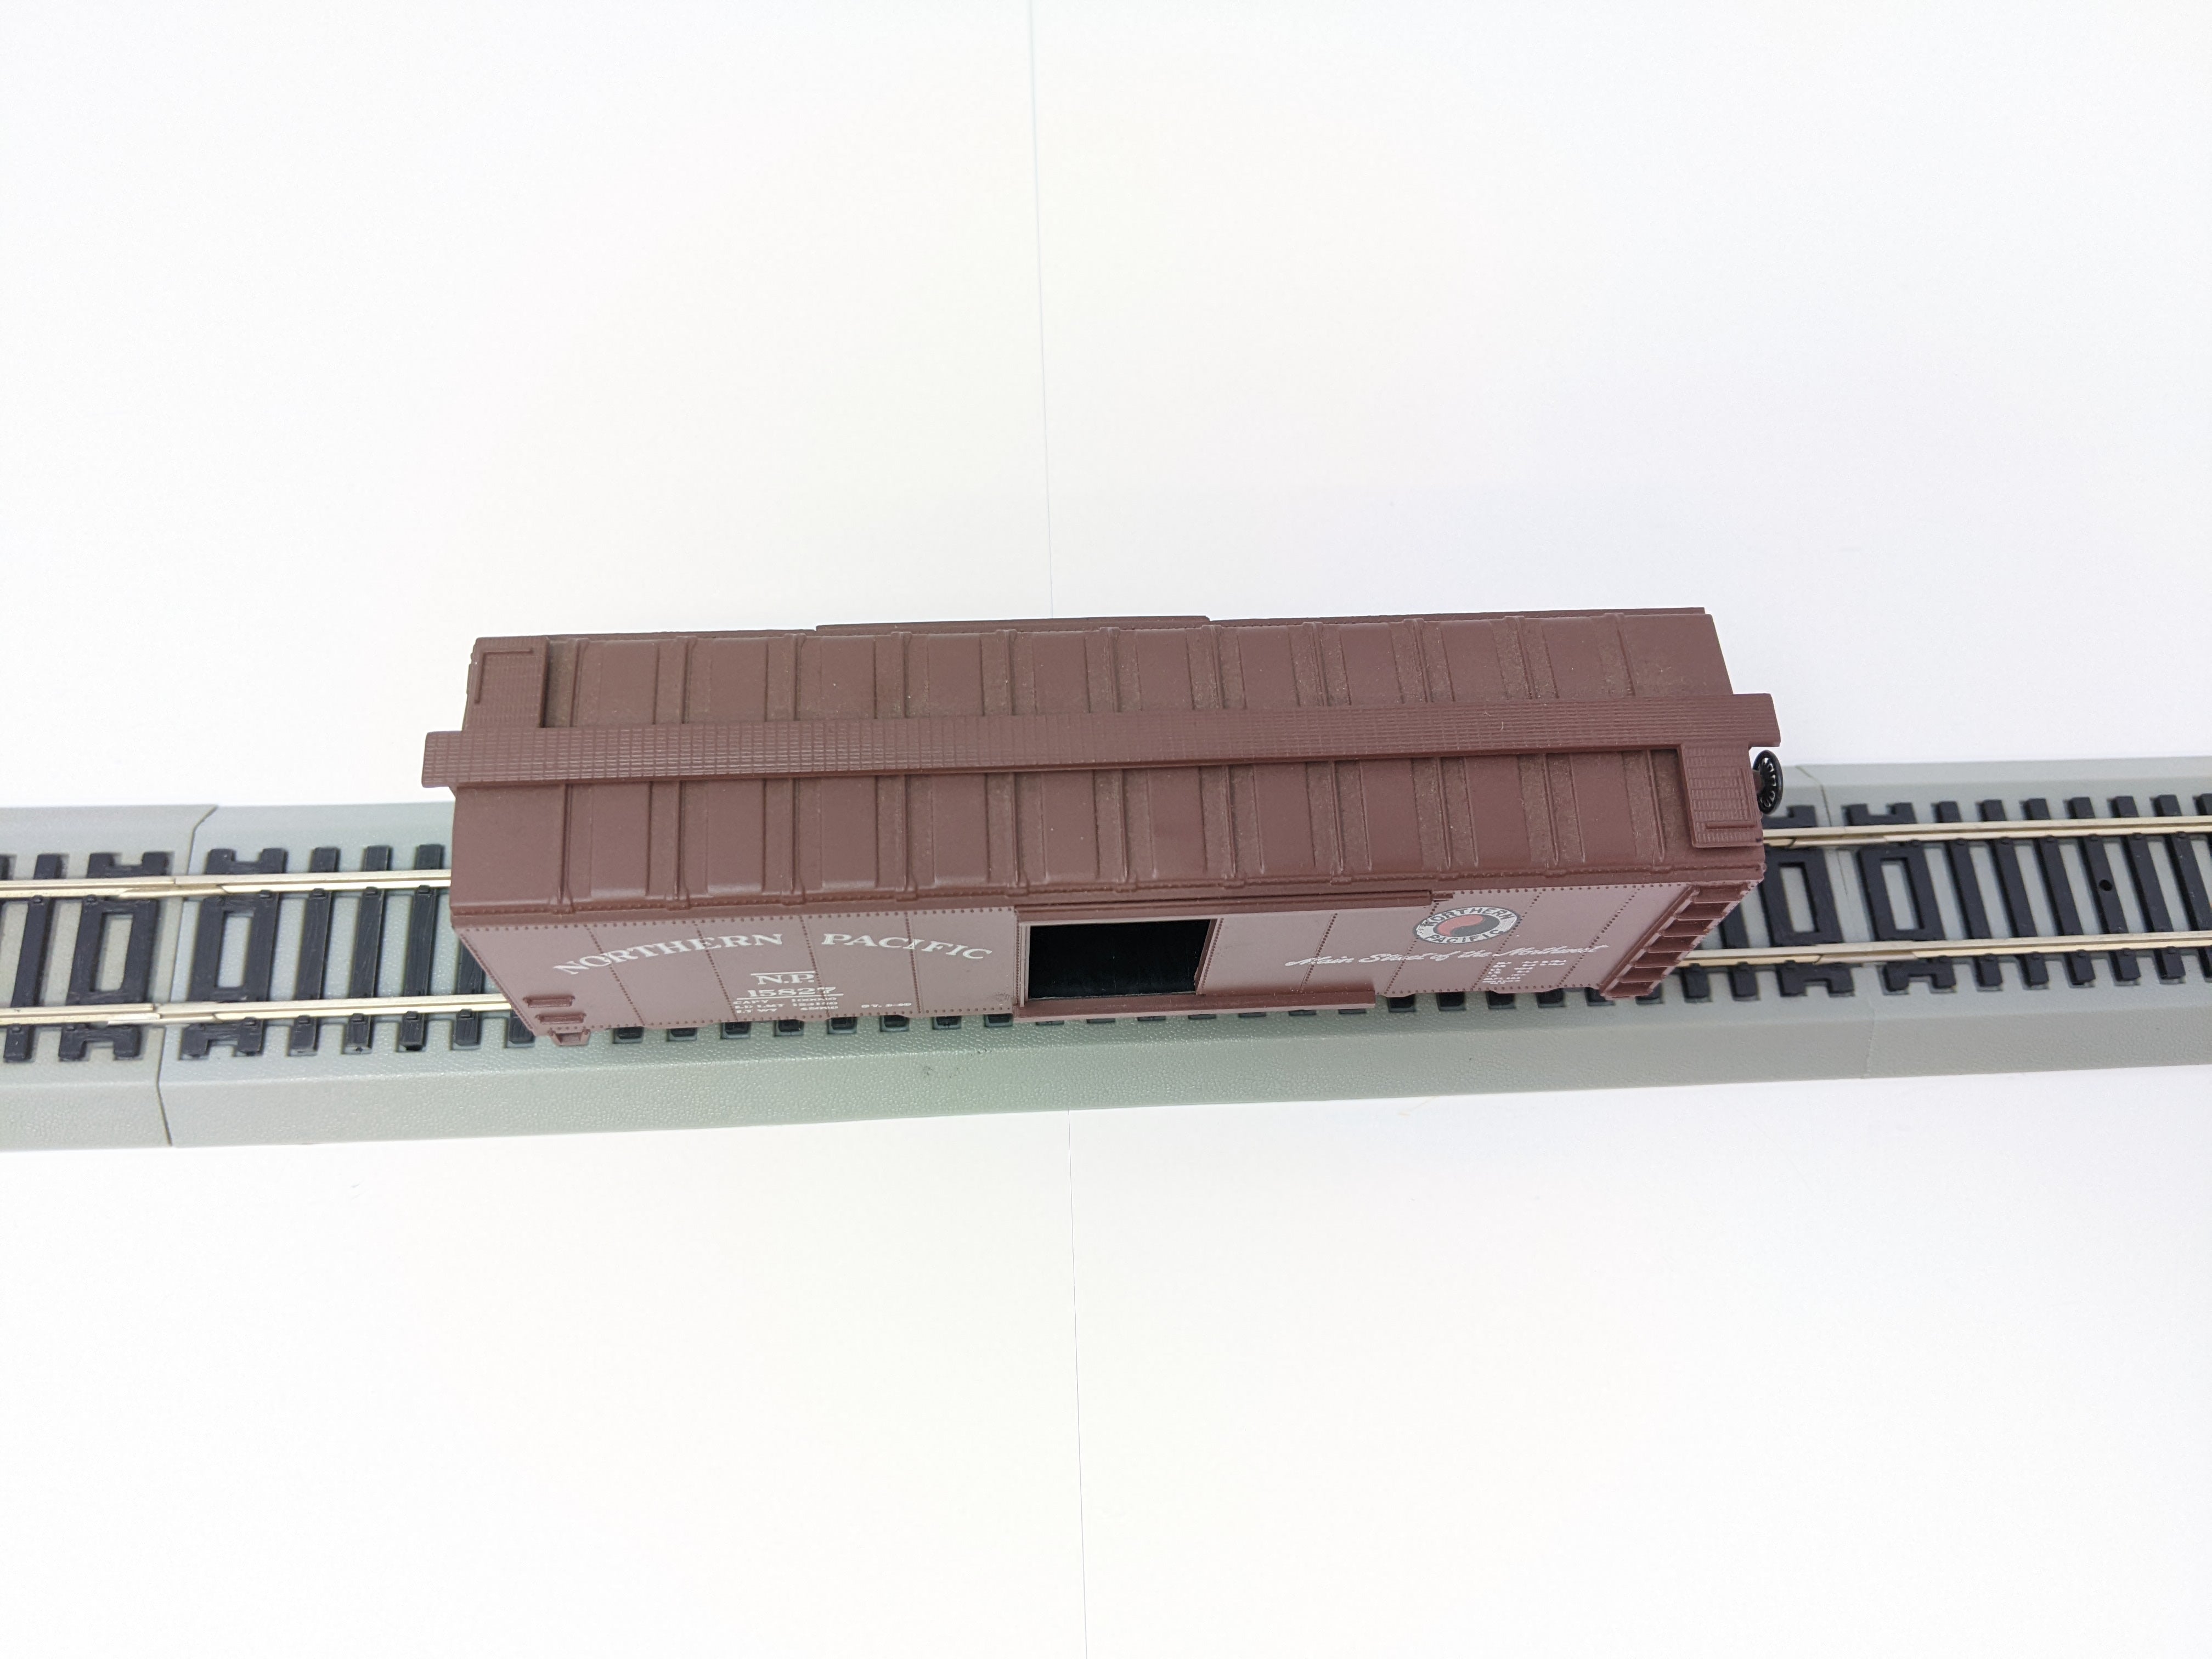 USED Athearn HO Scale, 40' Box Car, Northern Pacific NP #15827